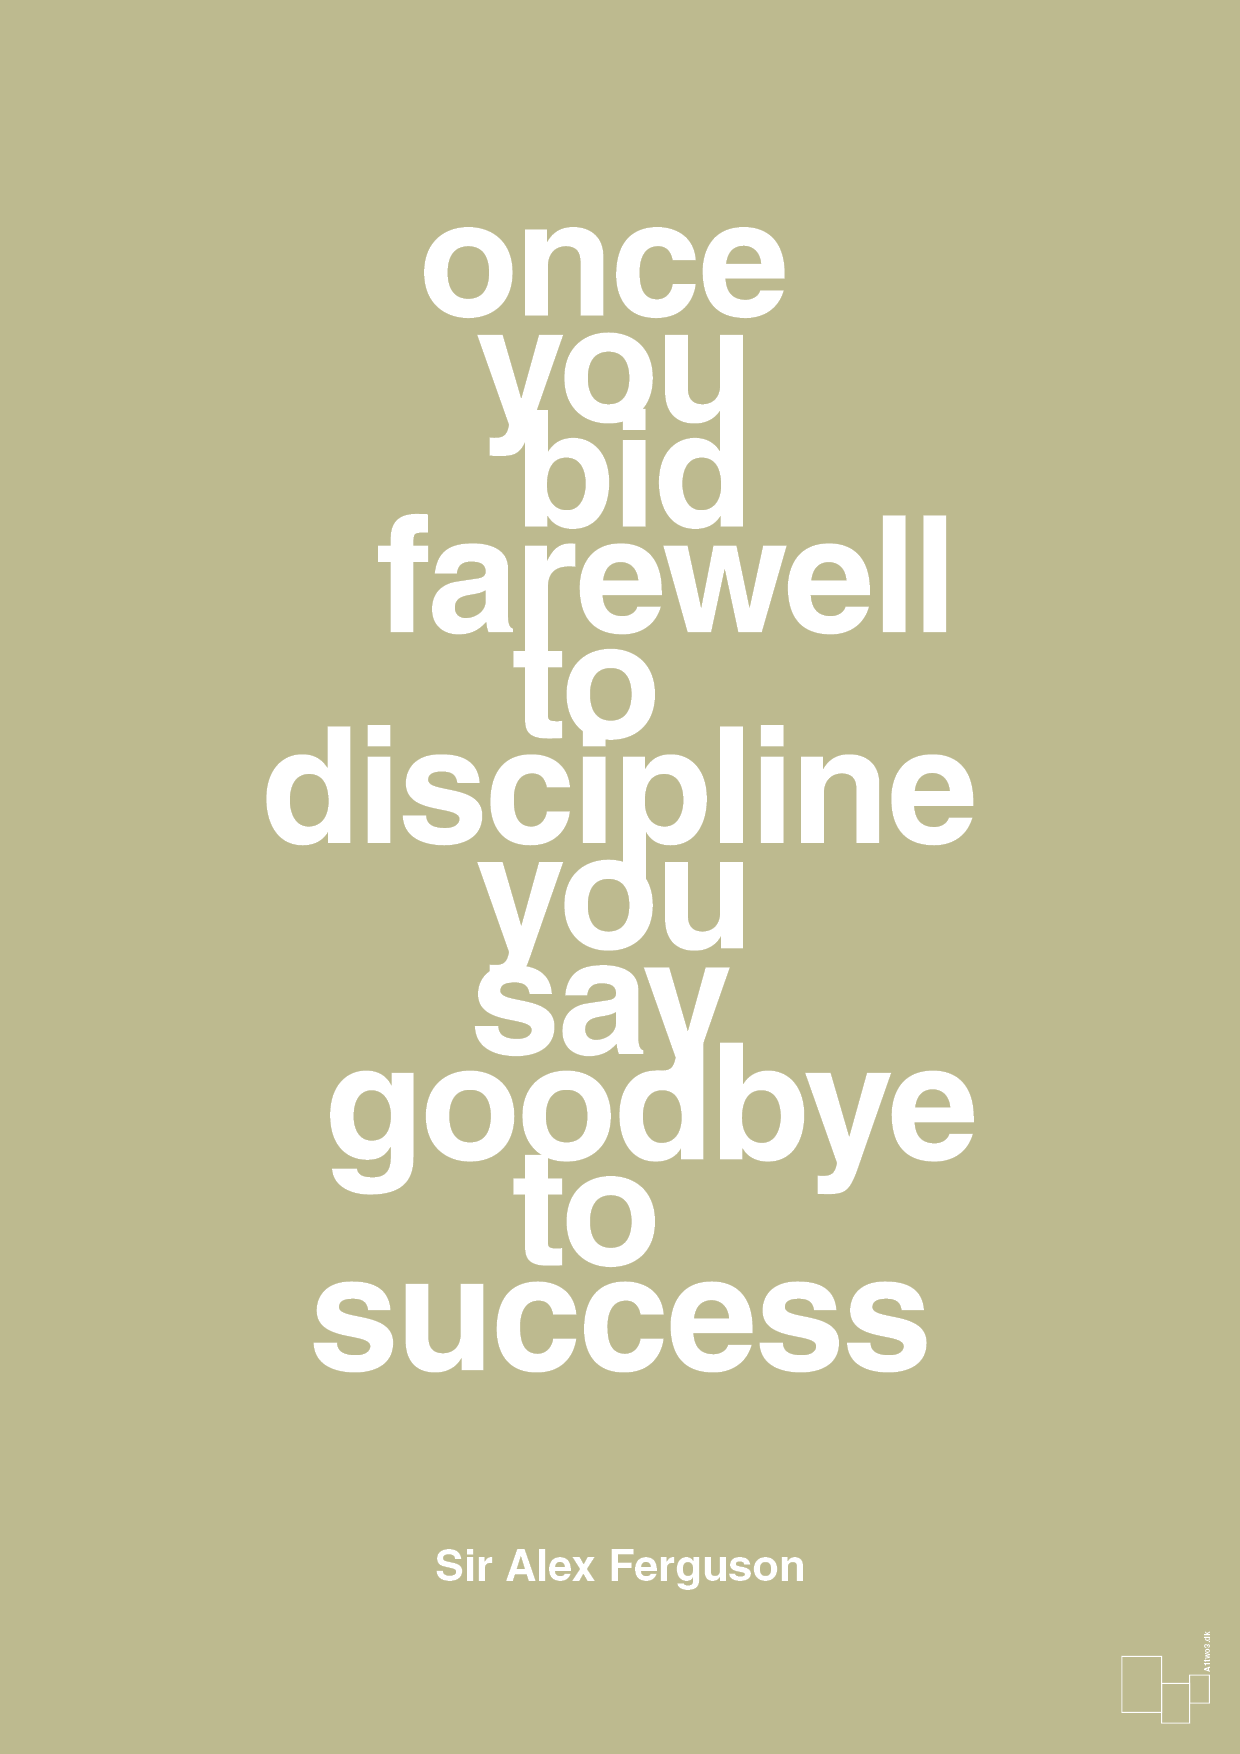 once you bid farewell to discipline you say goodbye to success - Plakat med Citater i Back to Nature